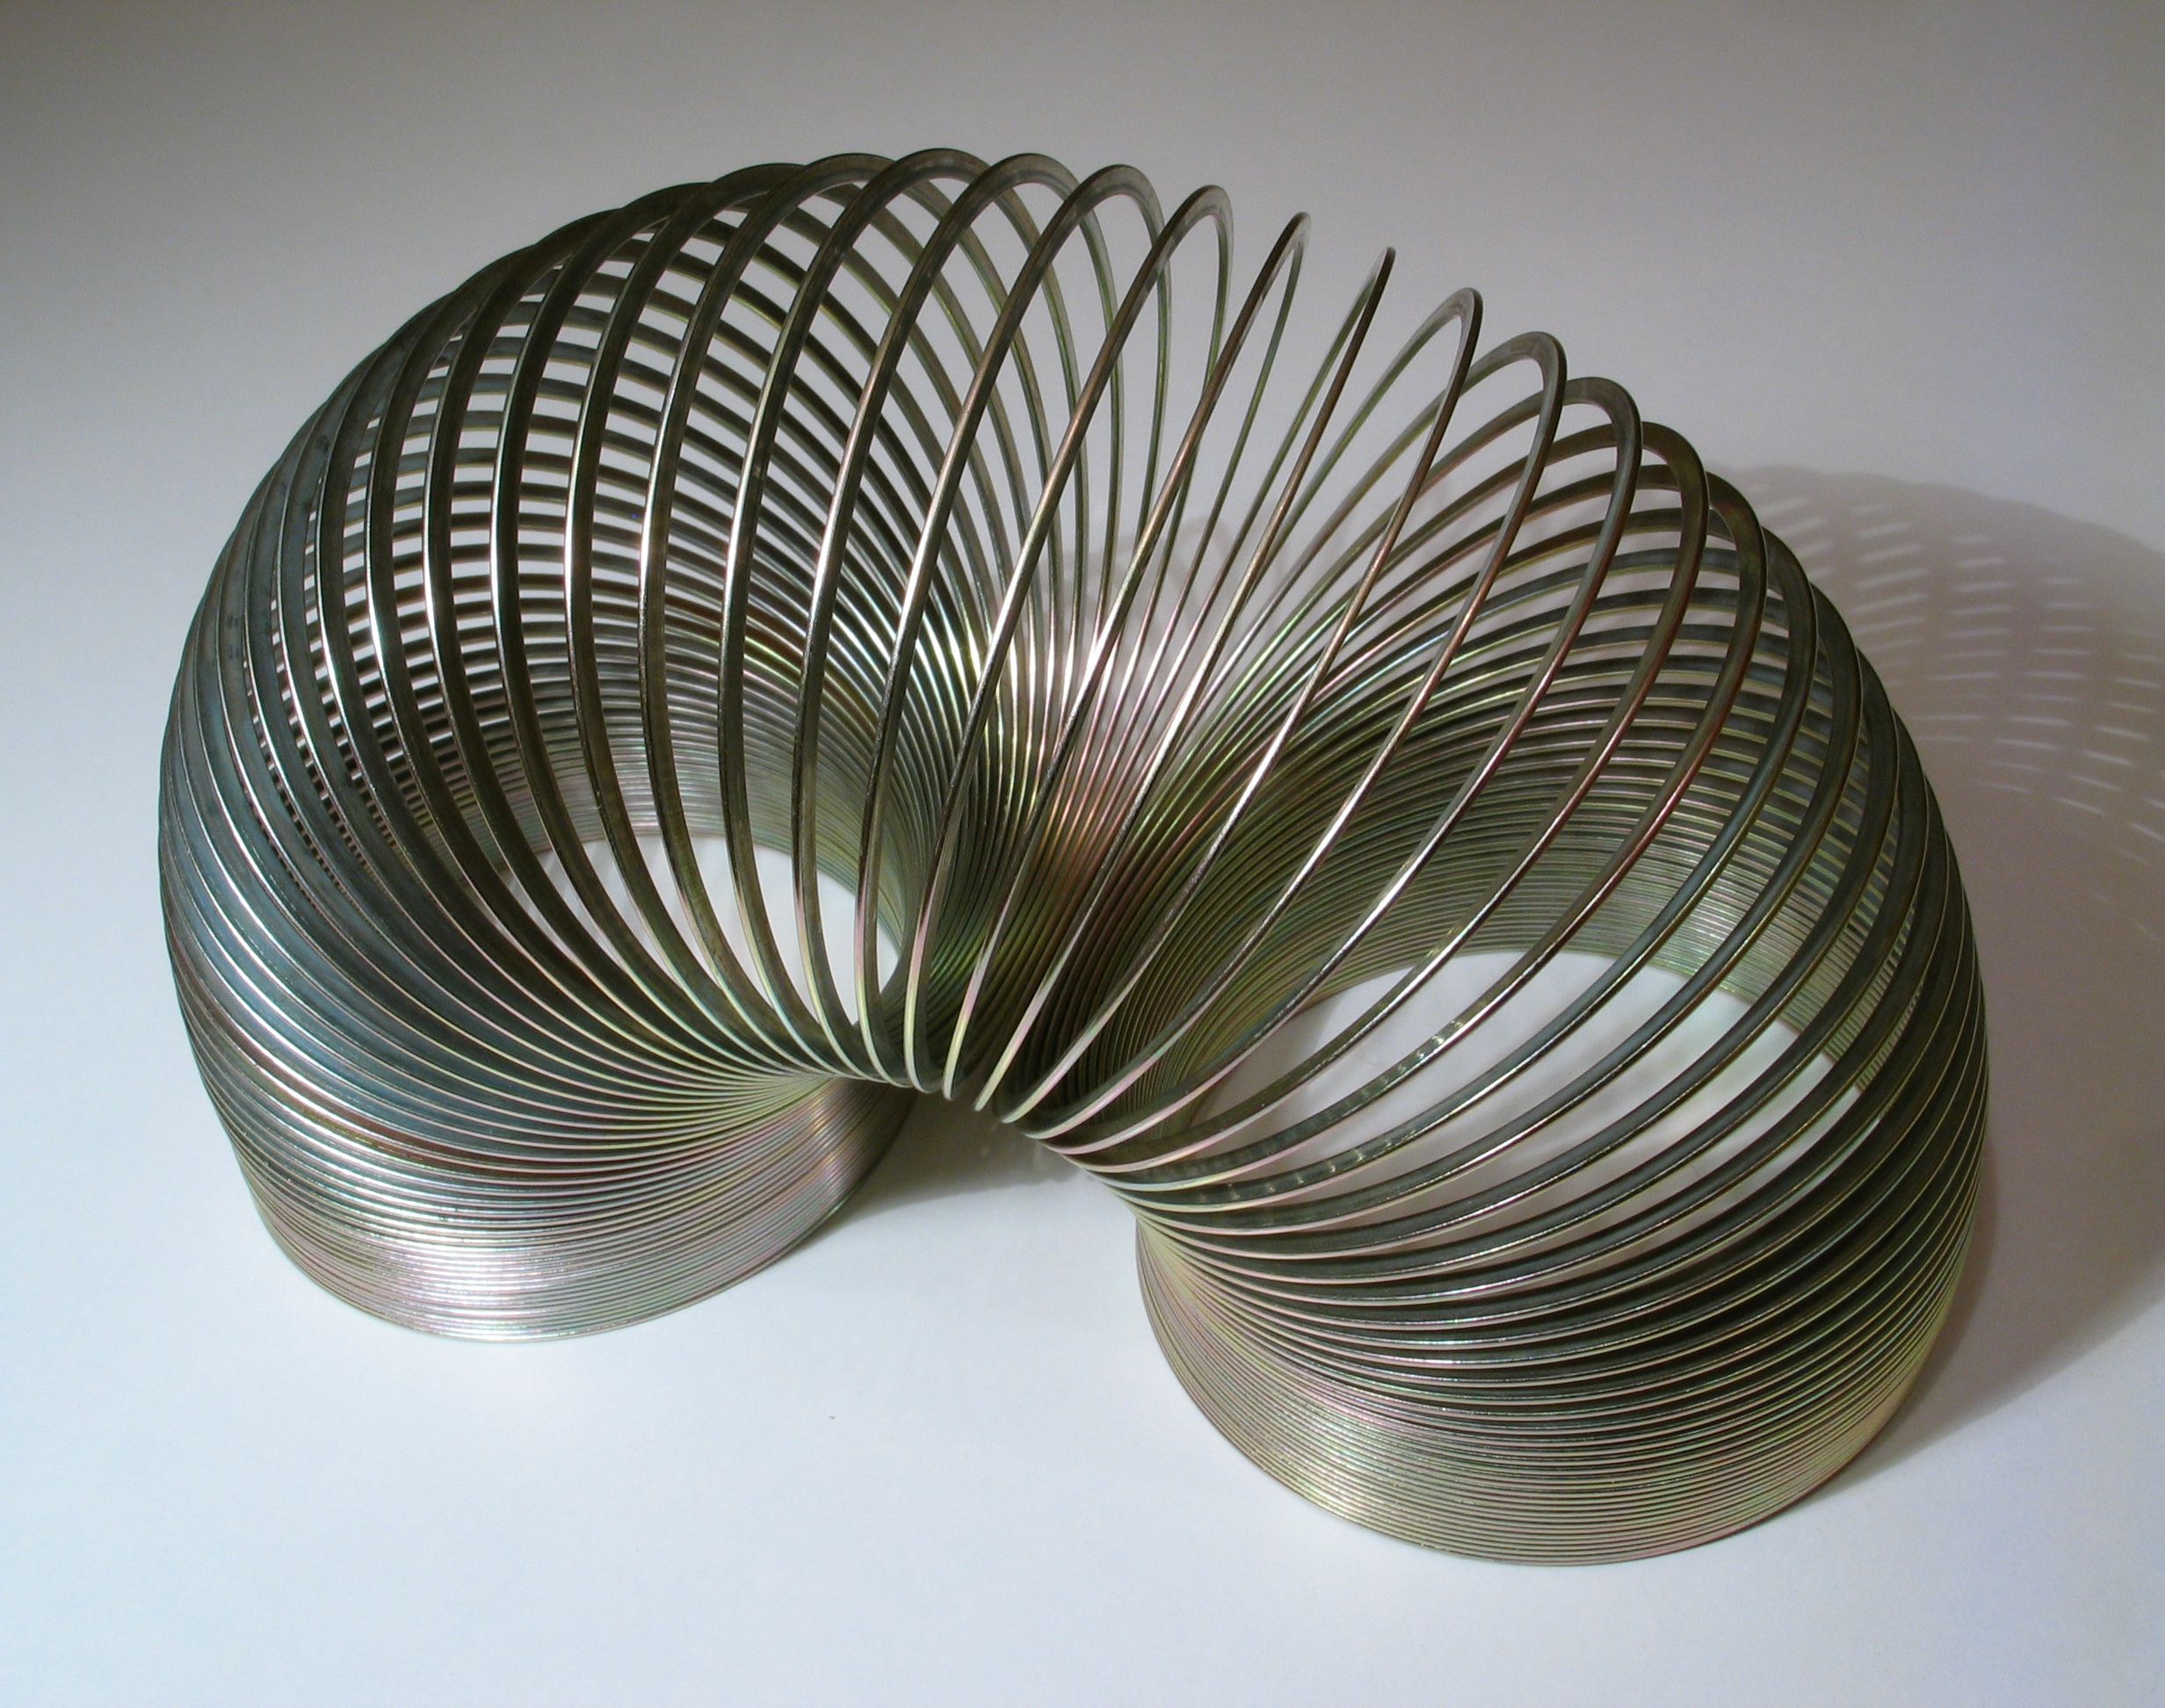 <p>As Ace Ventura pointed out, everyone loves a slinky. These classic coil toys continue to be made in the United States, and millions have been sold over the years. Slinkies are perhaps best-known for hopping down staircases all on their own, but their metallic properties have seen them turned into everything from science experiments to impromptu radio transmitters.</p>